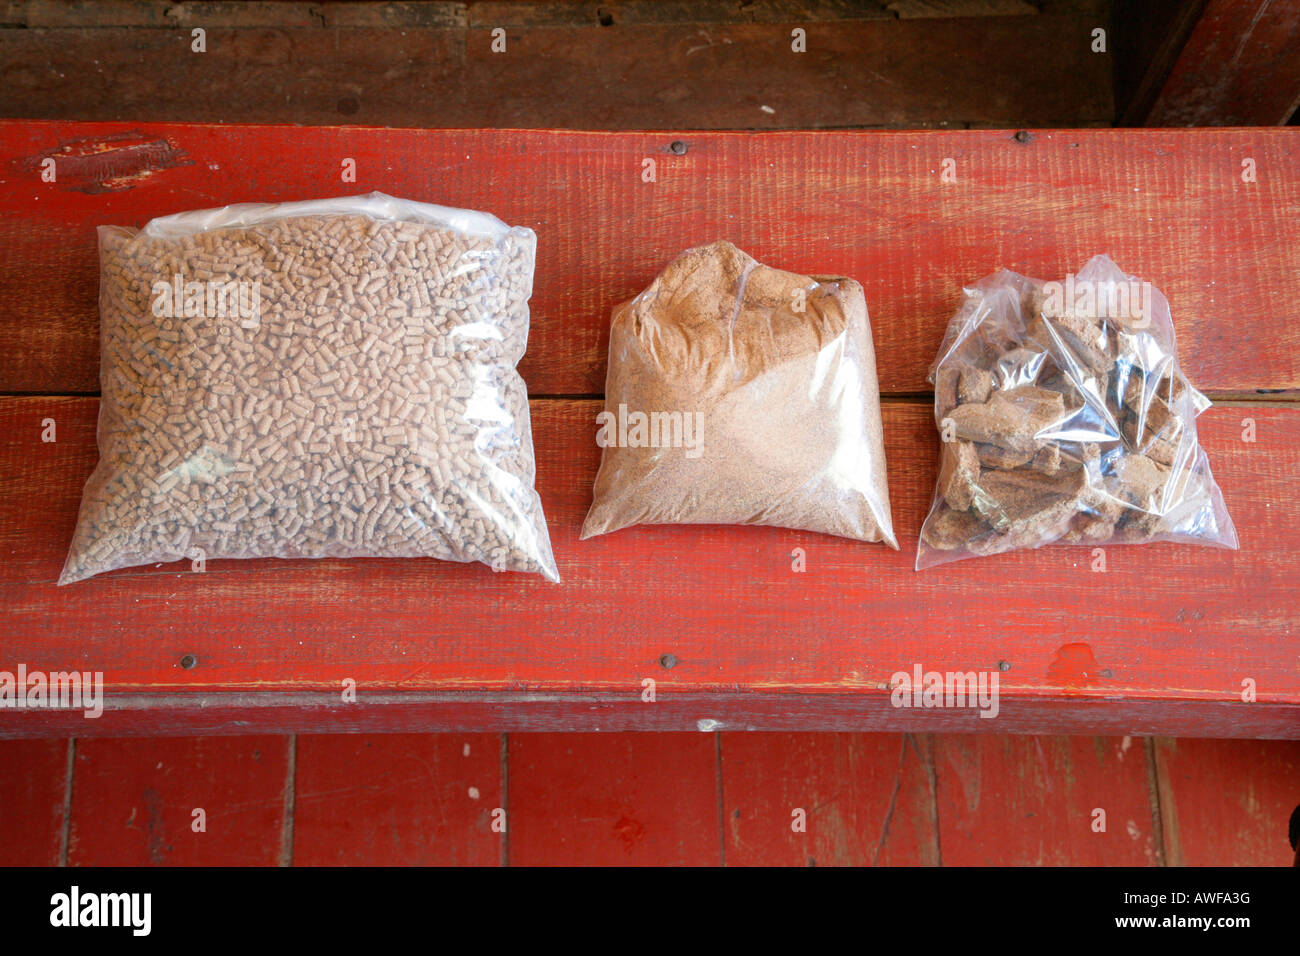 Coconut products, shavings, chips and grease, coconut processing, Georgetown, Guyana, South America Stock Photo